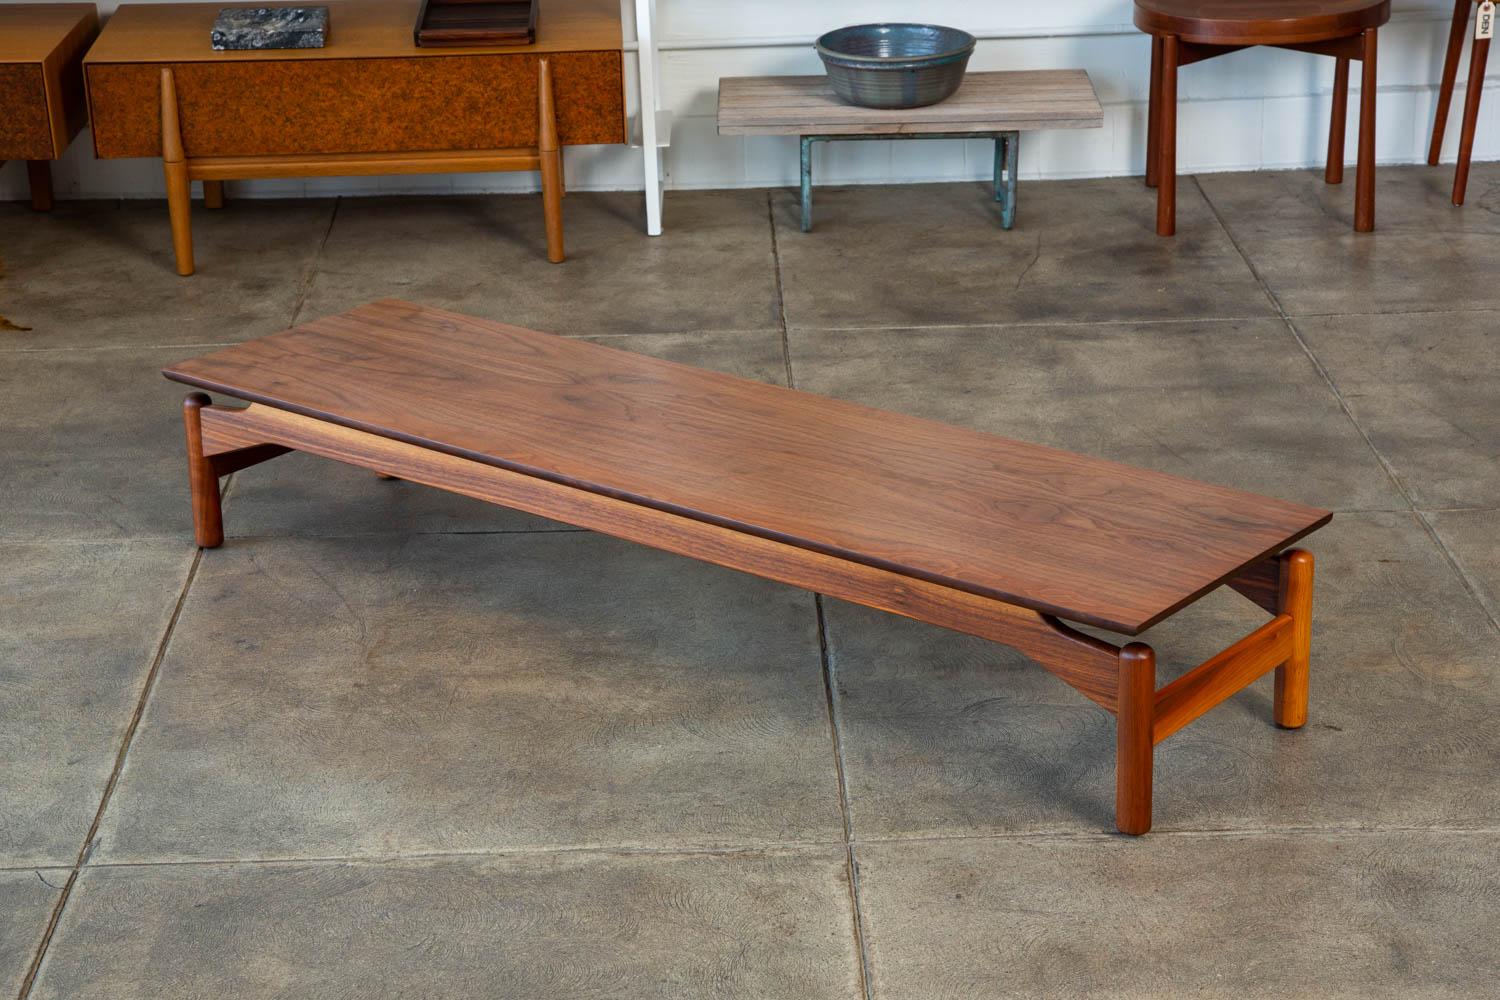 Greta Grossman for Glenn of California walnut bench or coffee table. This rare example features a floating walnut top with beautiful grain and turned walnut pillar legs.

Condition: Excellent restored condition; professionally refinished and